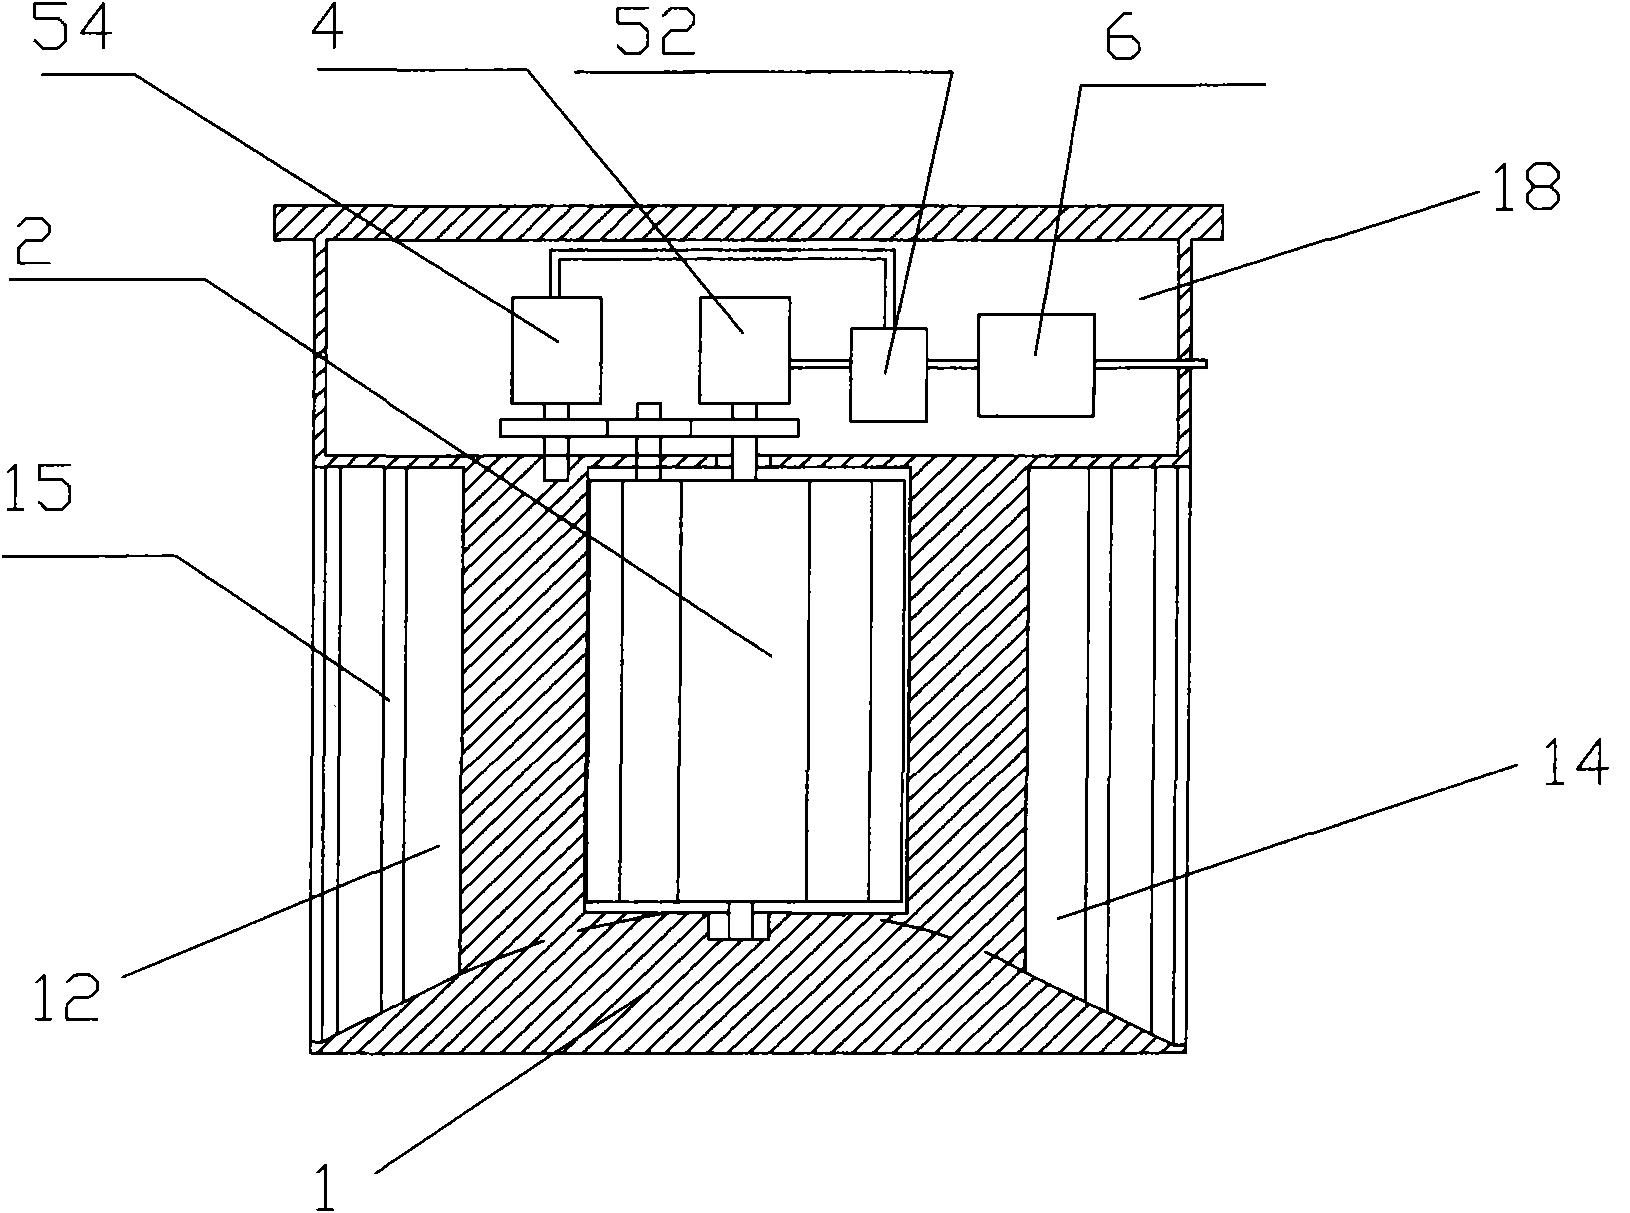 Wind-to-electricity conversion device applicable to rail wagon vehicles